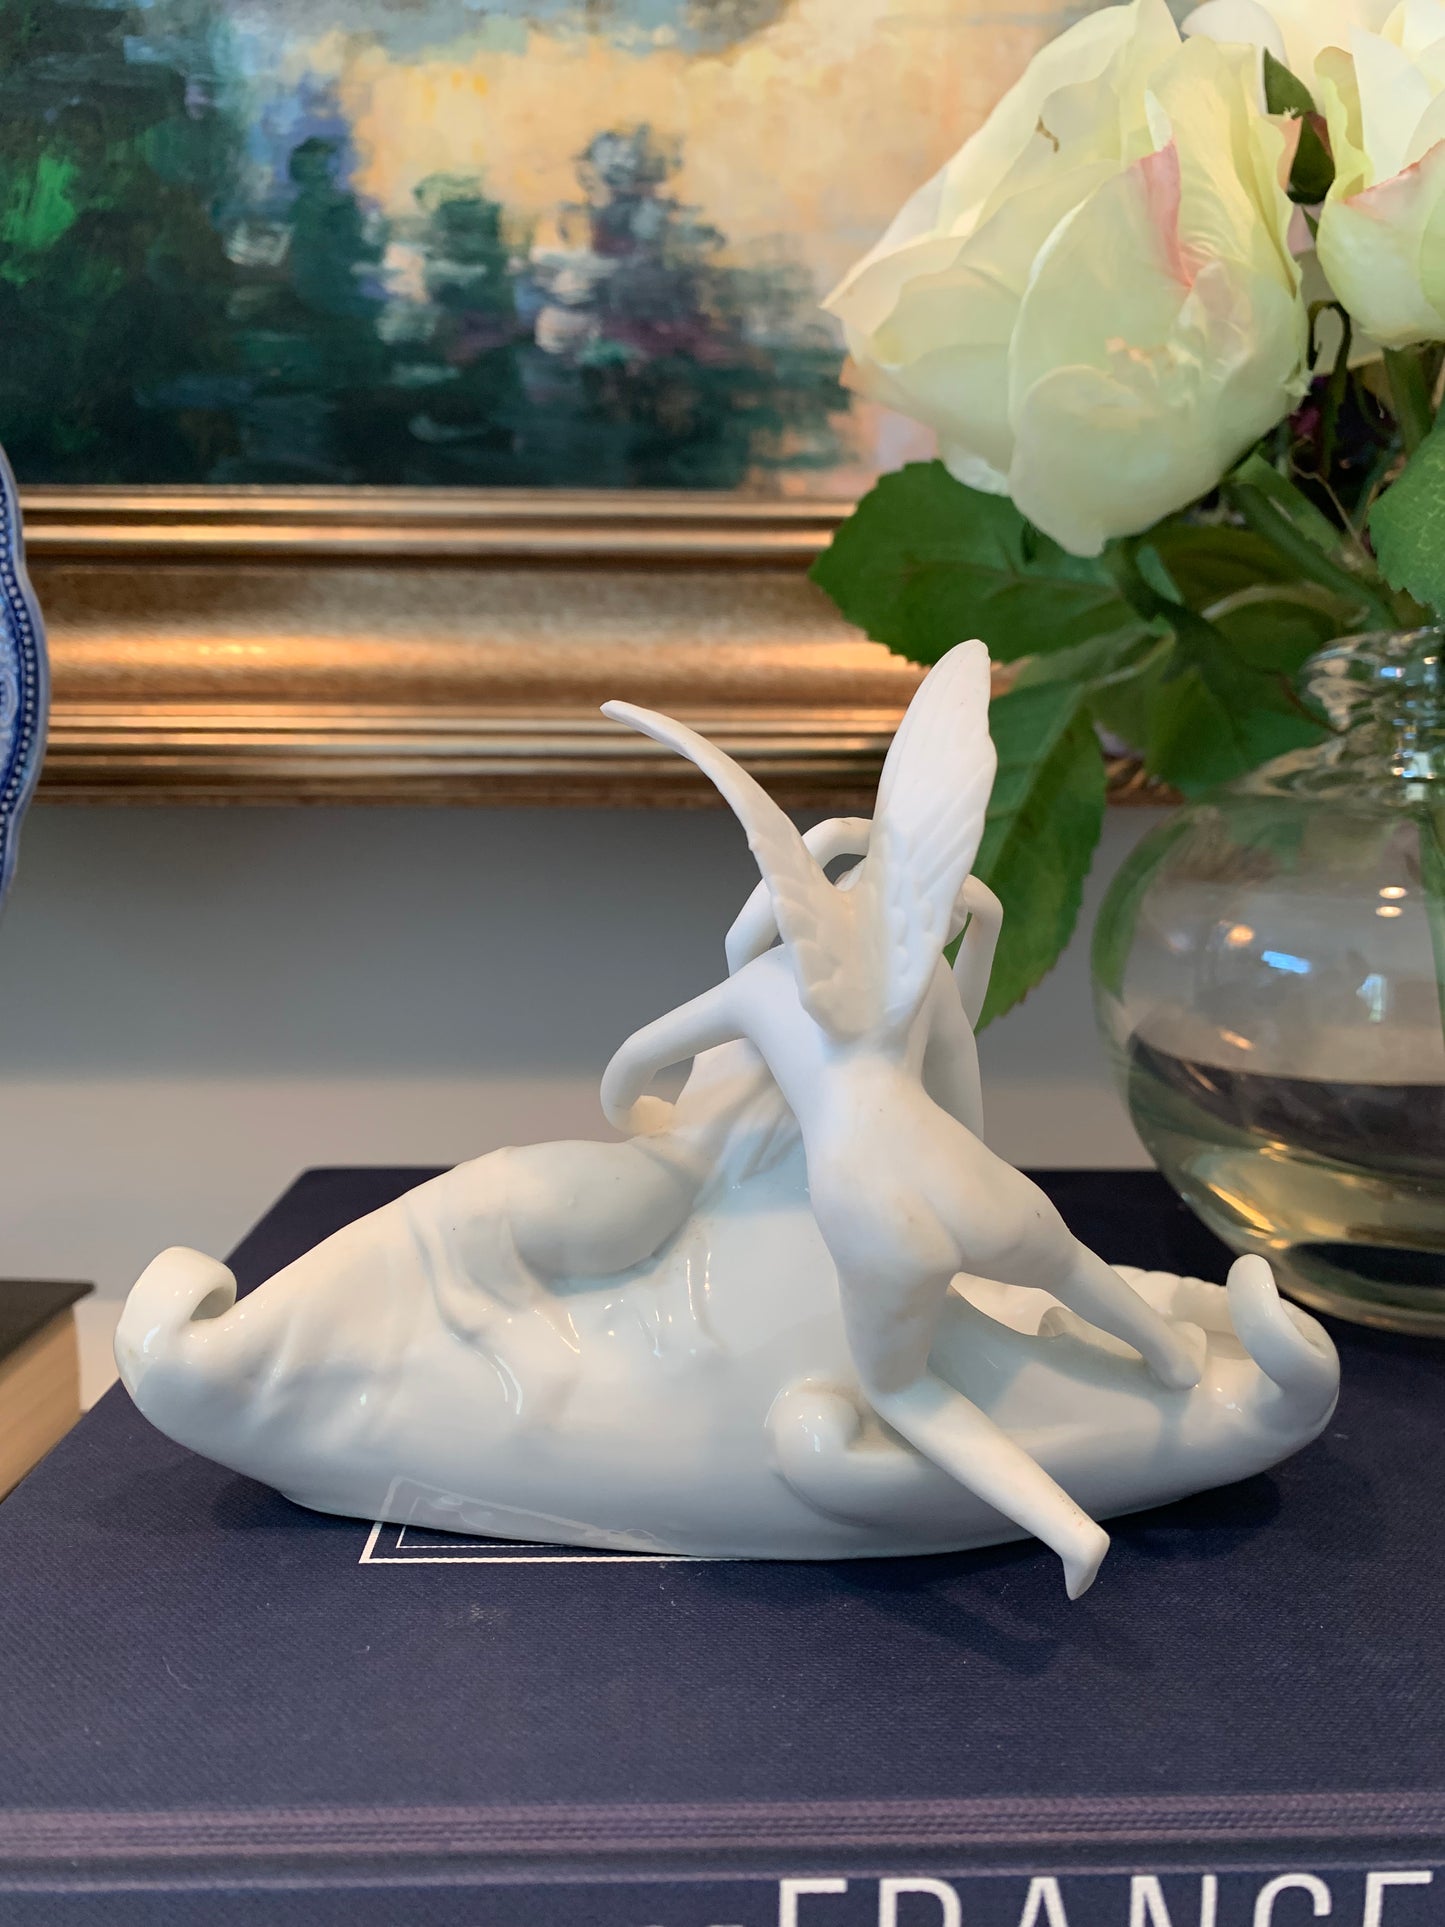 Psyche revived by Cupid's Kiss Porcelain Dish